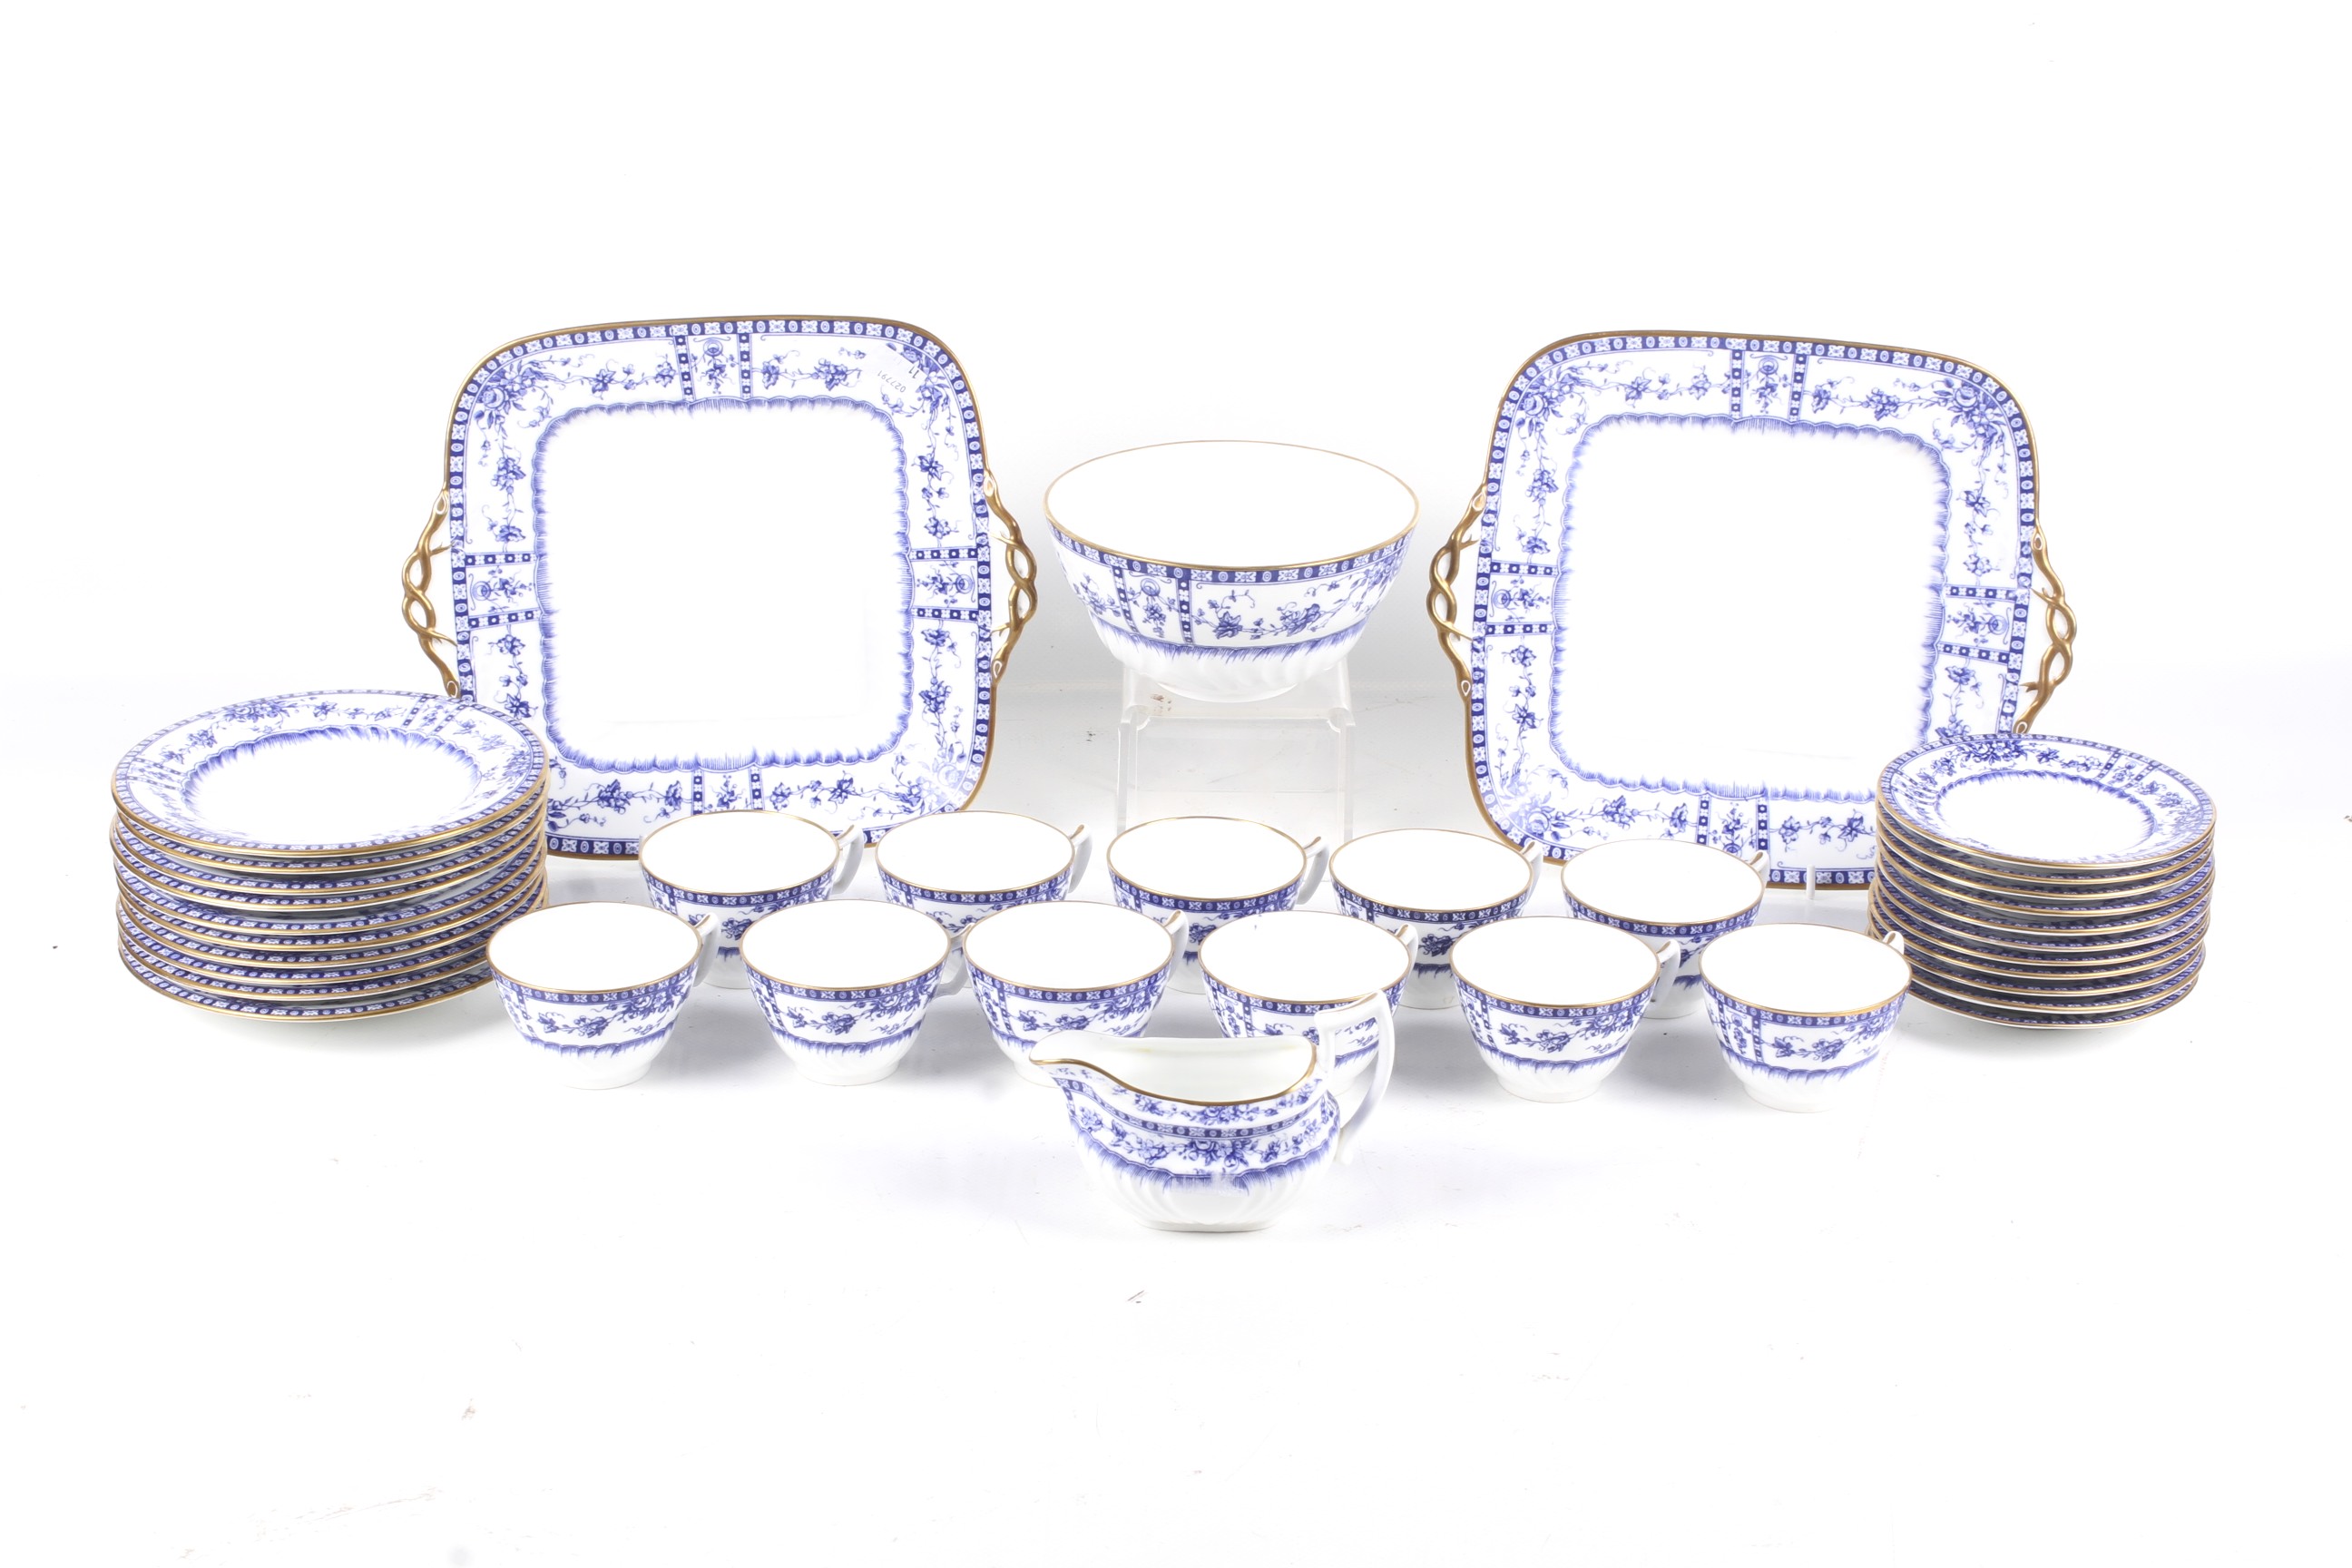 A Wedgwood tea service. With blue and white borders of flowers within gilt rims.